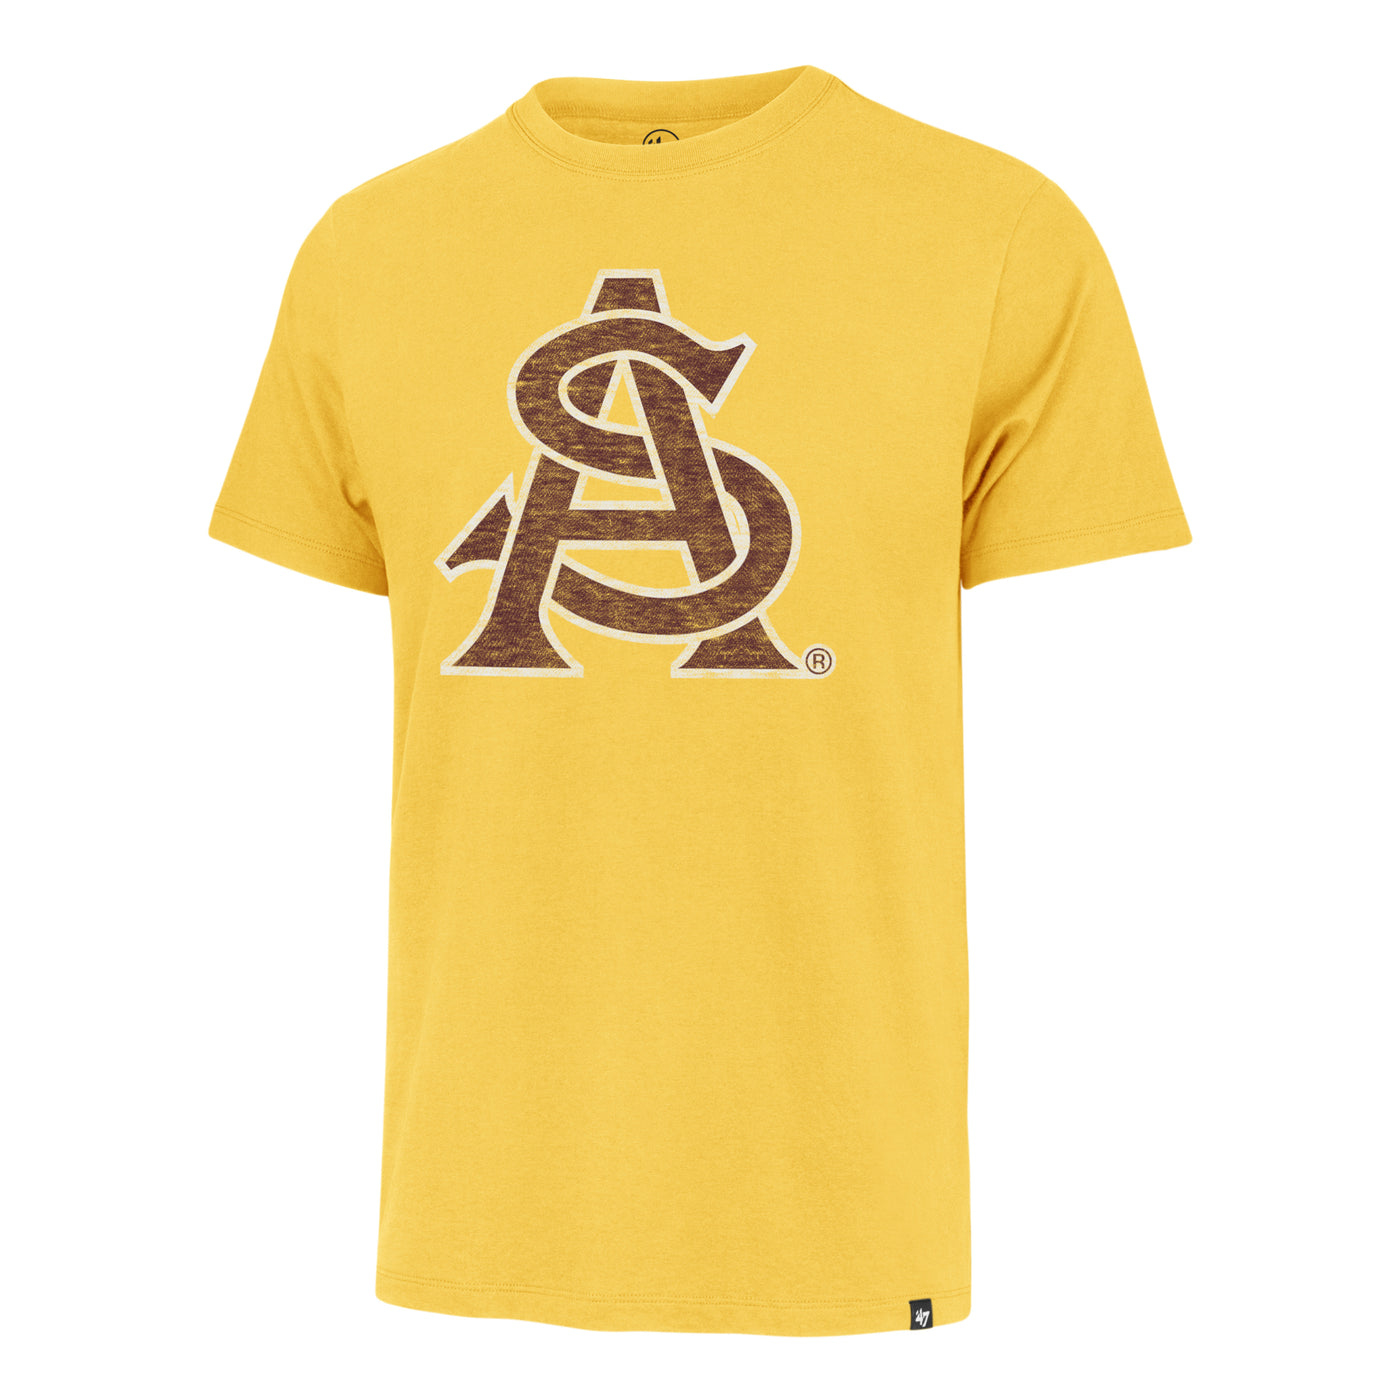 ASU Gold shirt with faded interlocking A&S logo on the chest. 